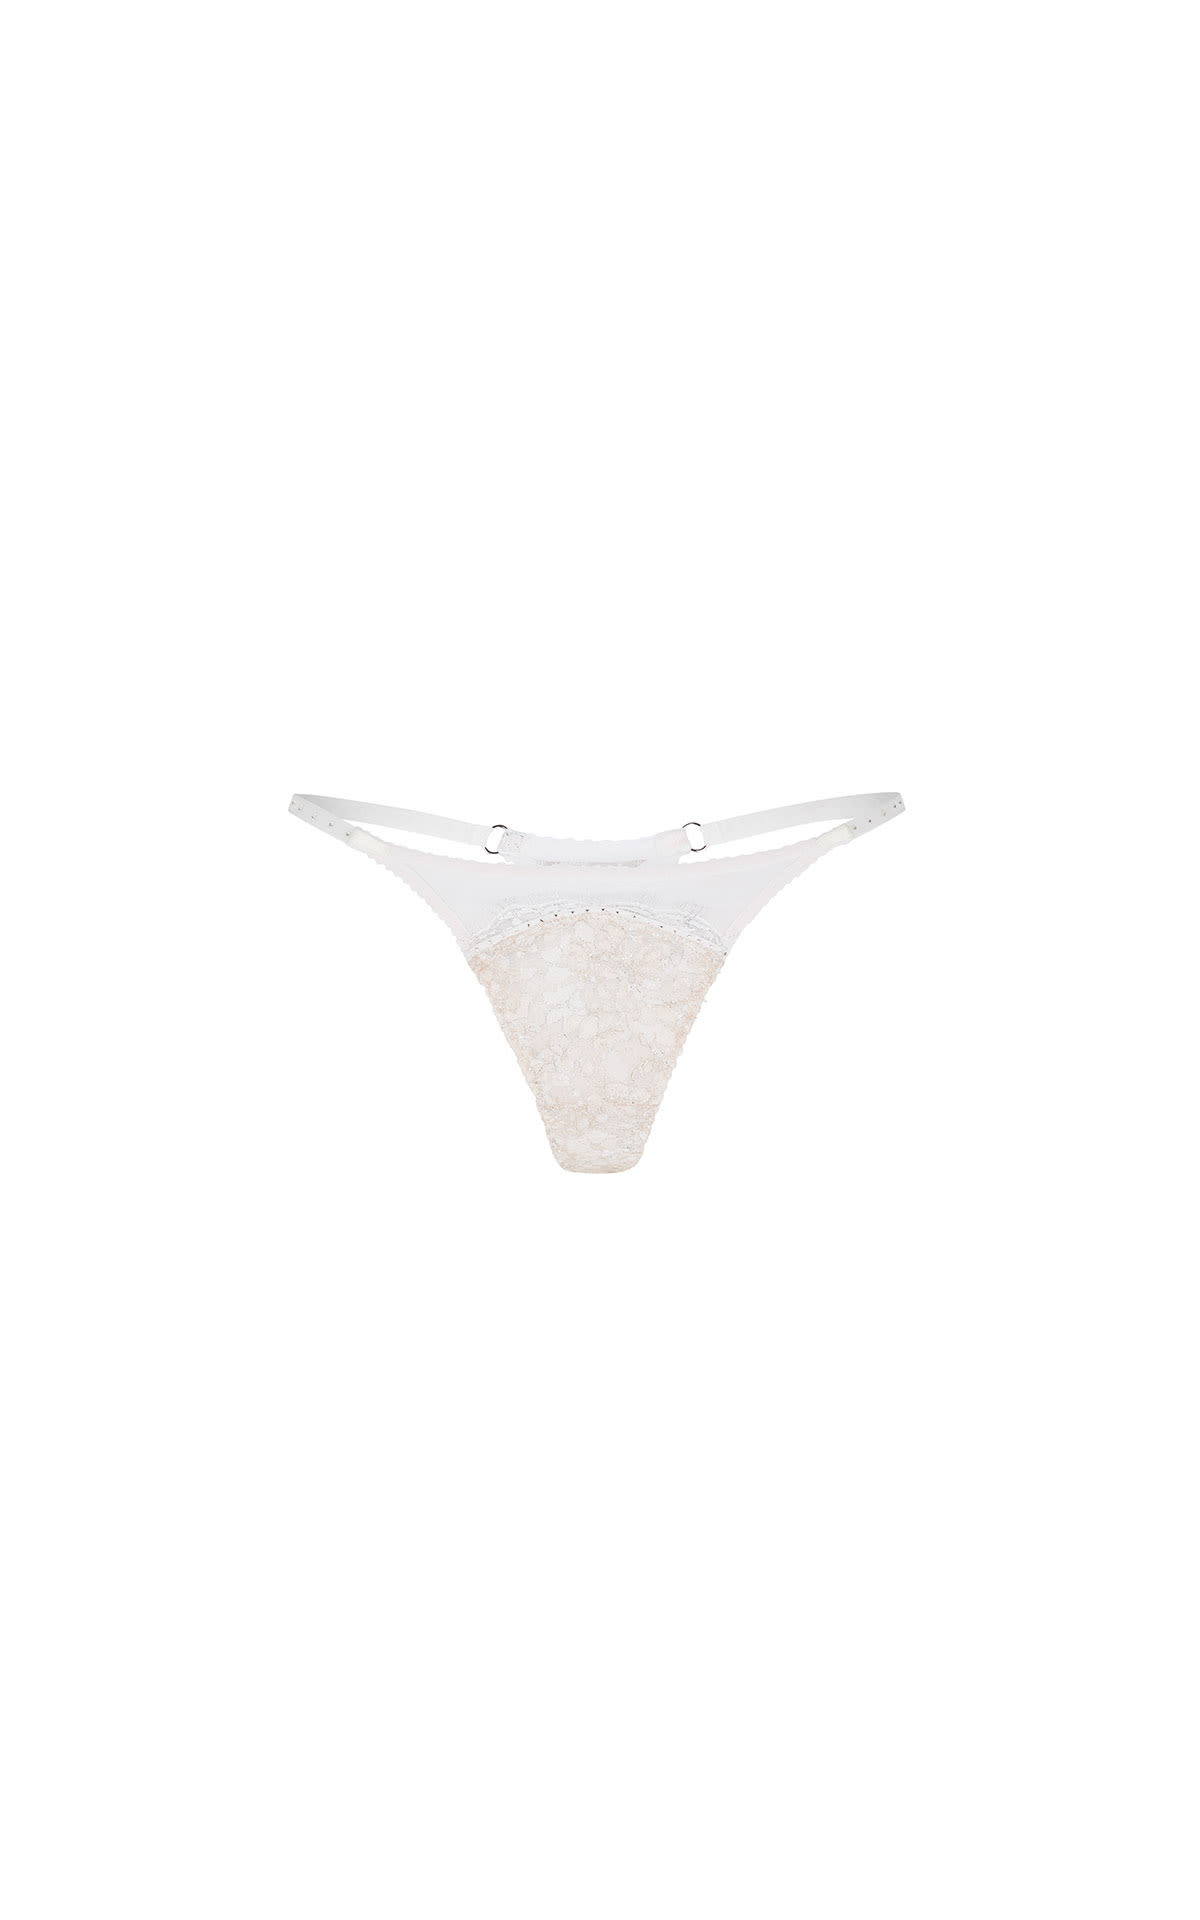 Agent Provocateur Presley thong blush and white from Bicester Village